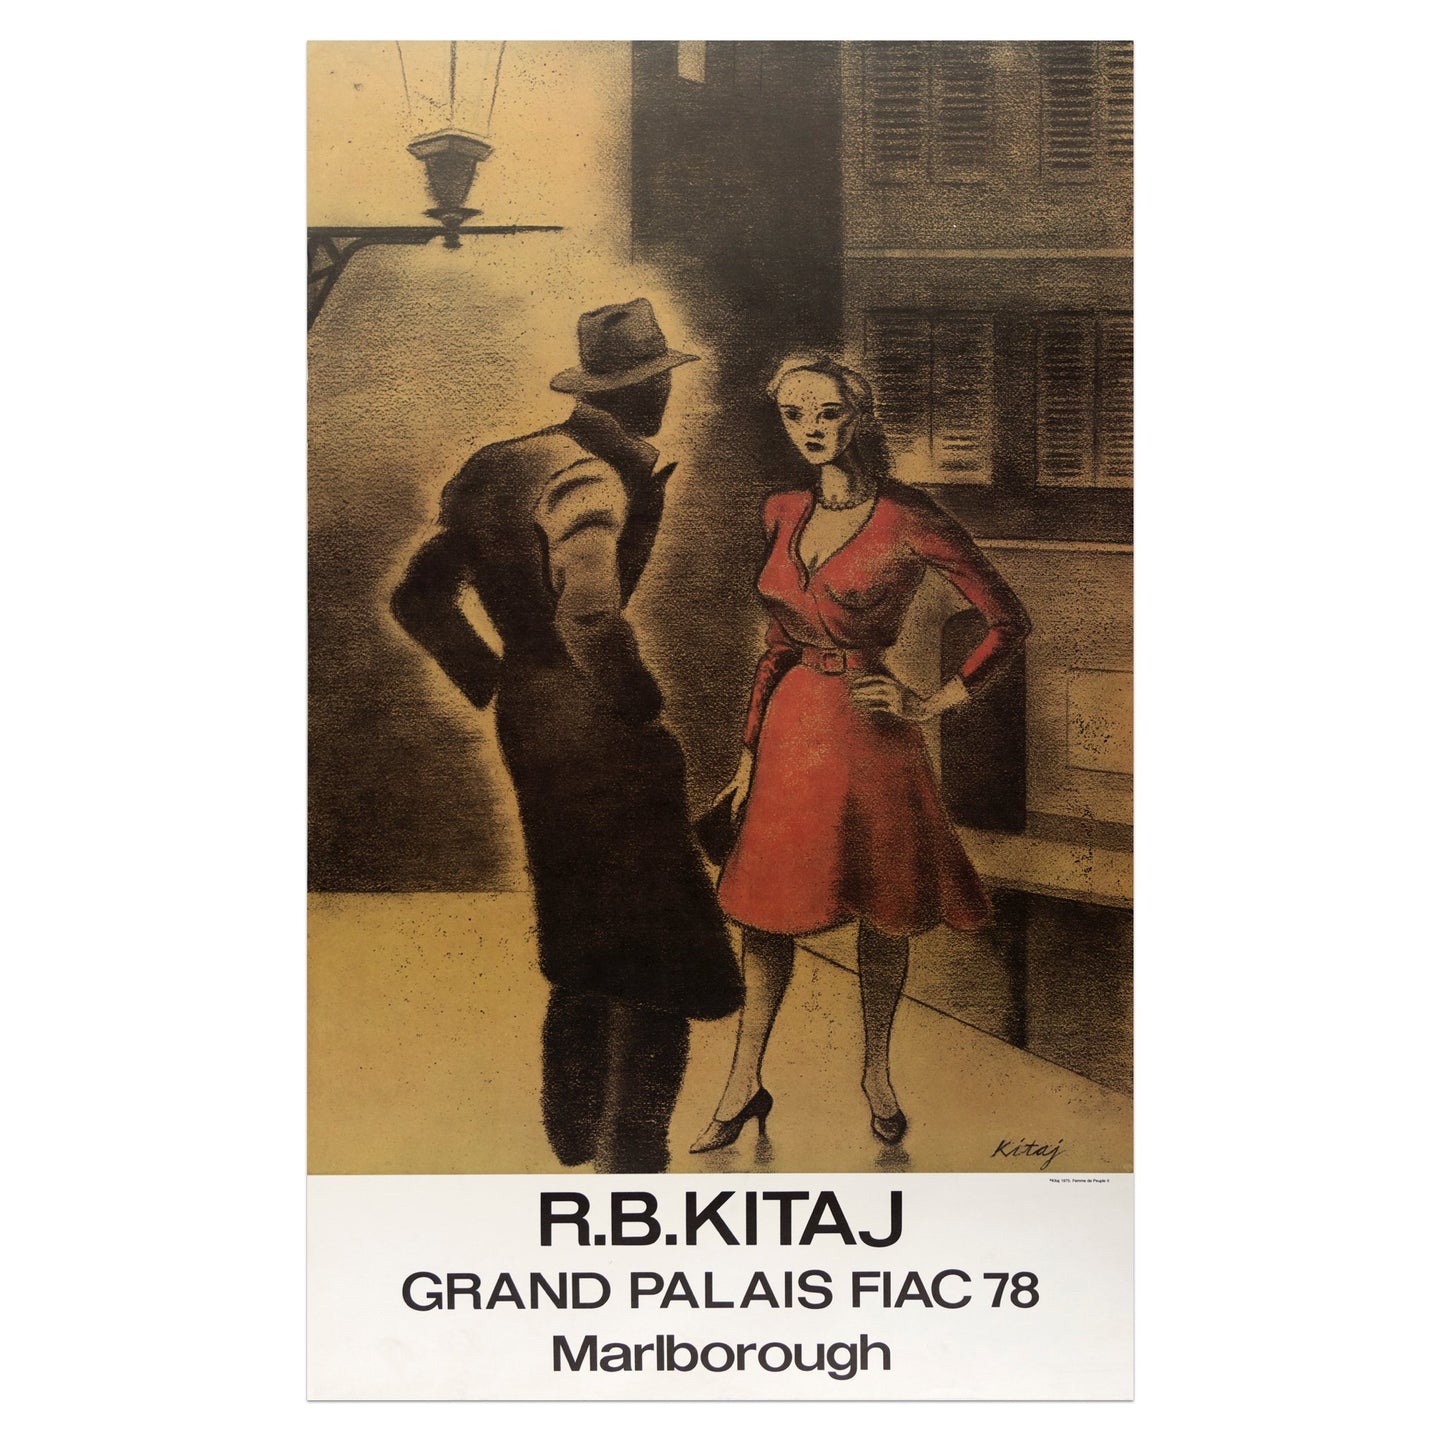 1978 R.B. Kitaj poster for Grand Palais FIAC featuring a woman in a red dress talking to a man under a street light at night